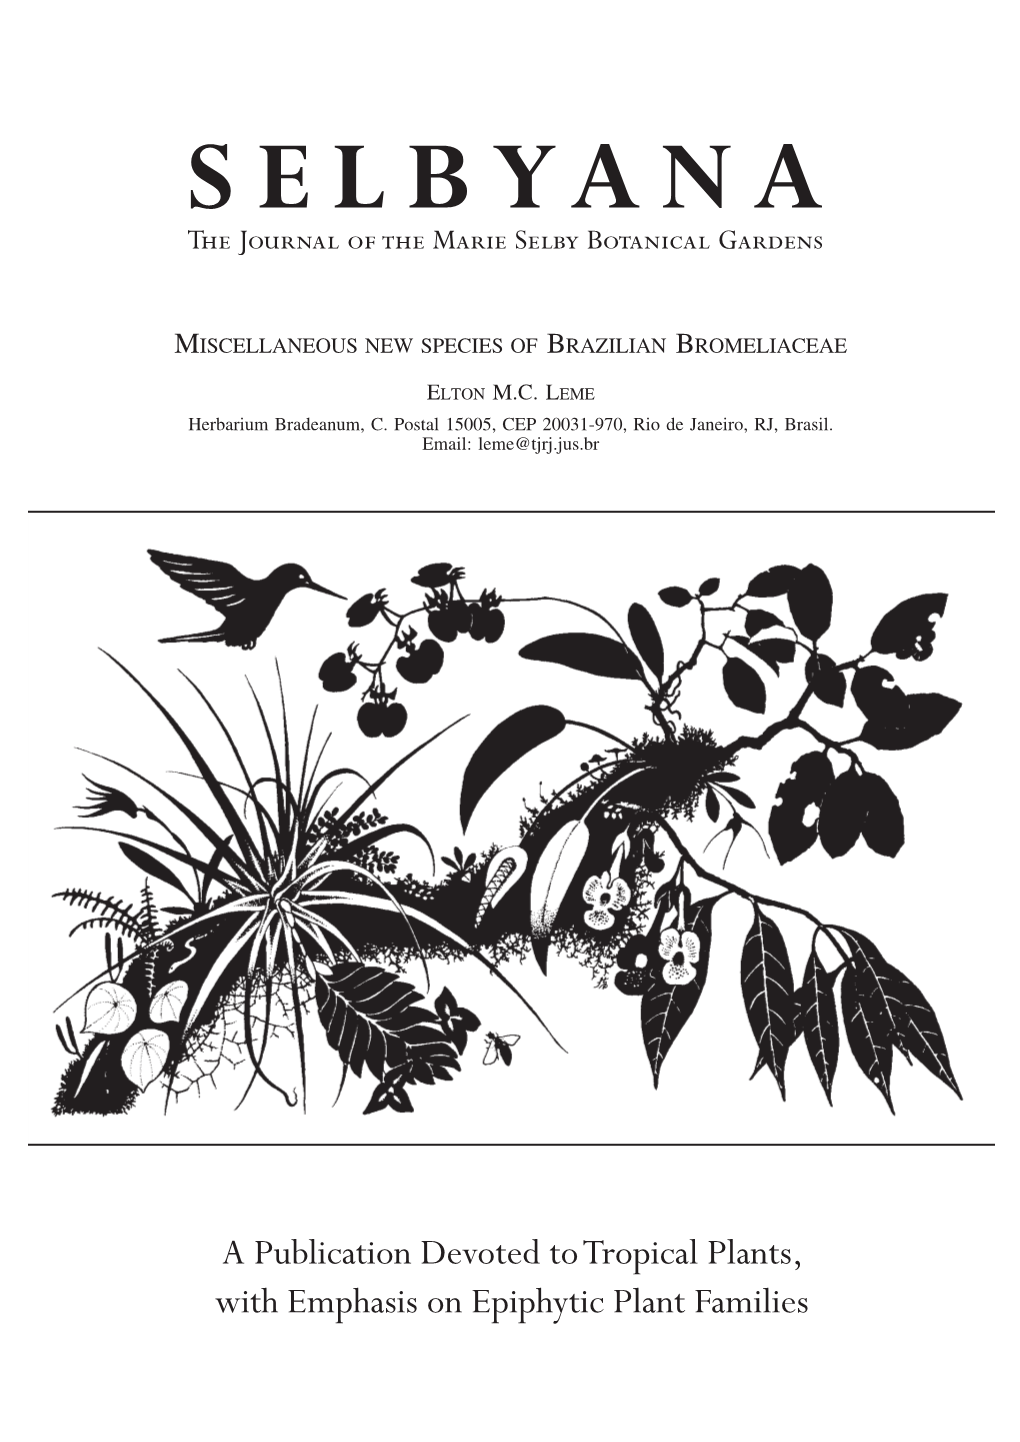 A Publication Devoted to Tropical Plants, with Emphasis on Epiphytic